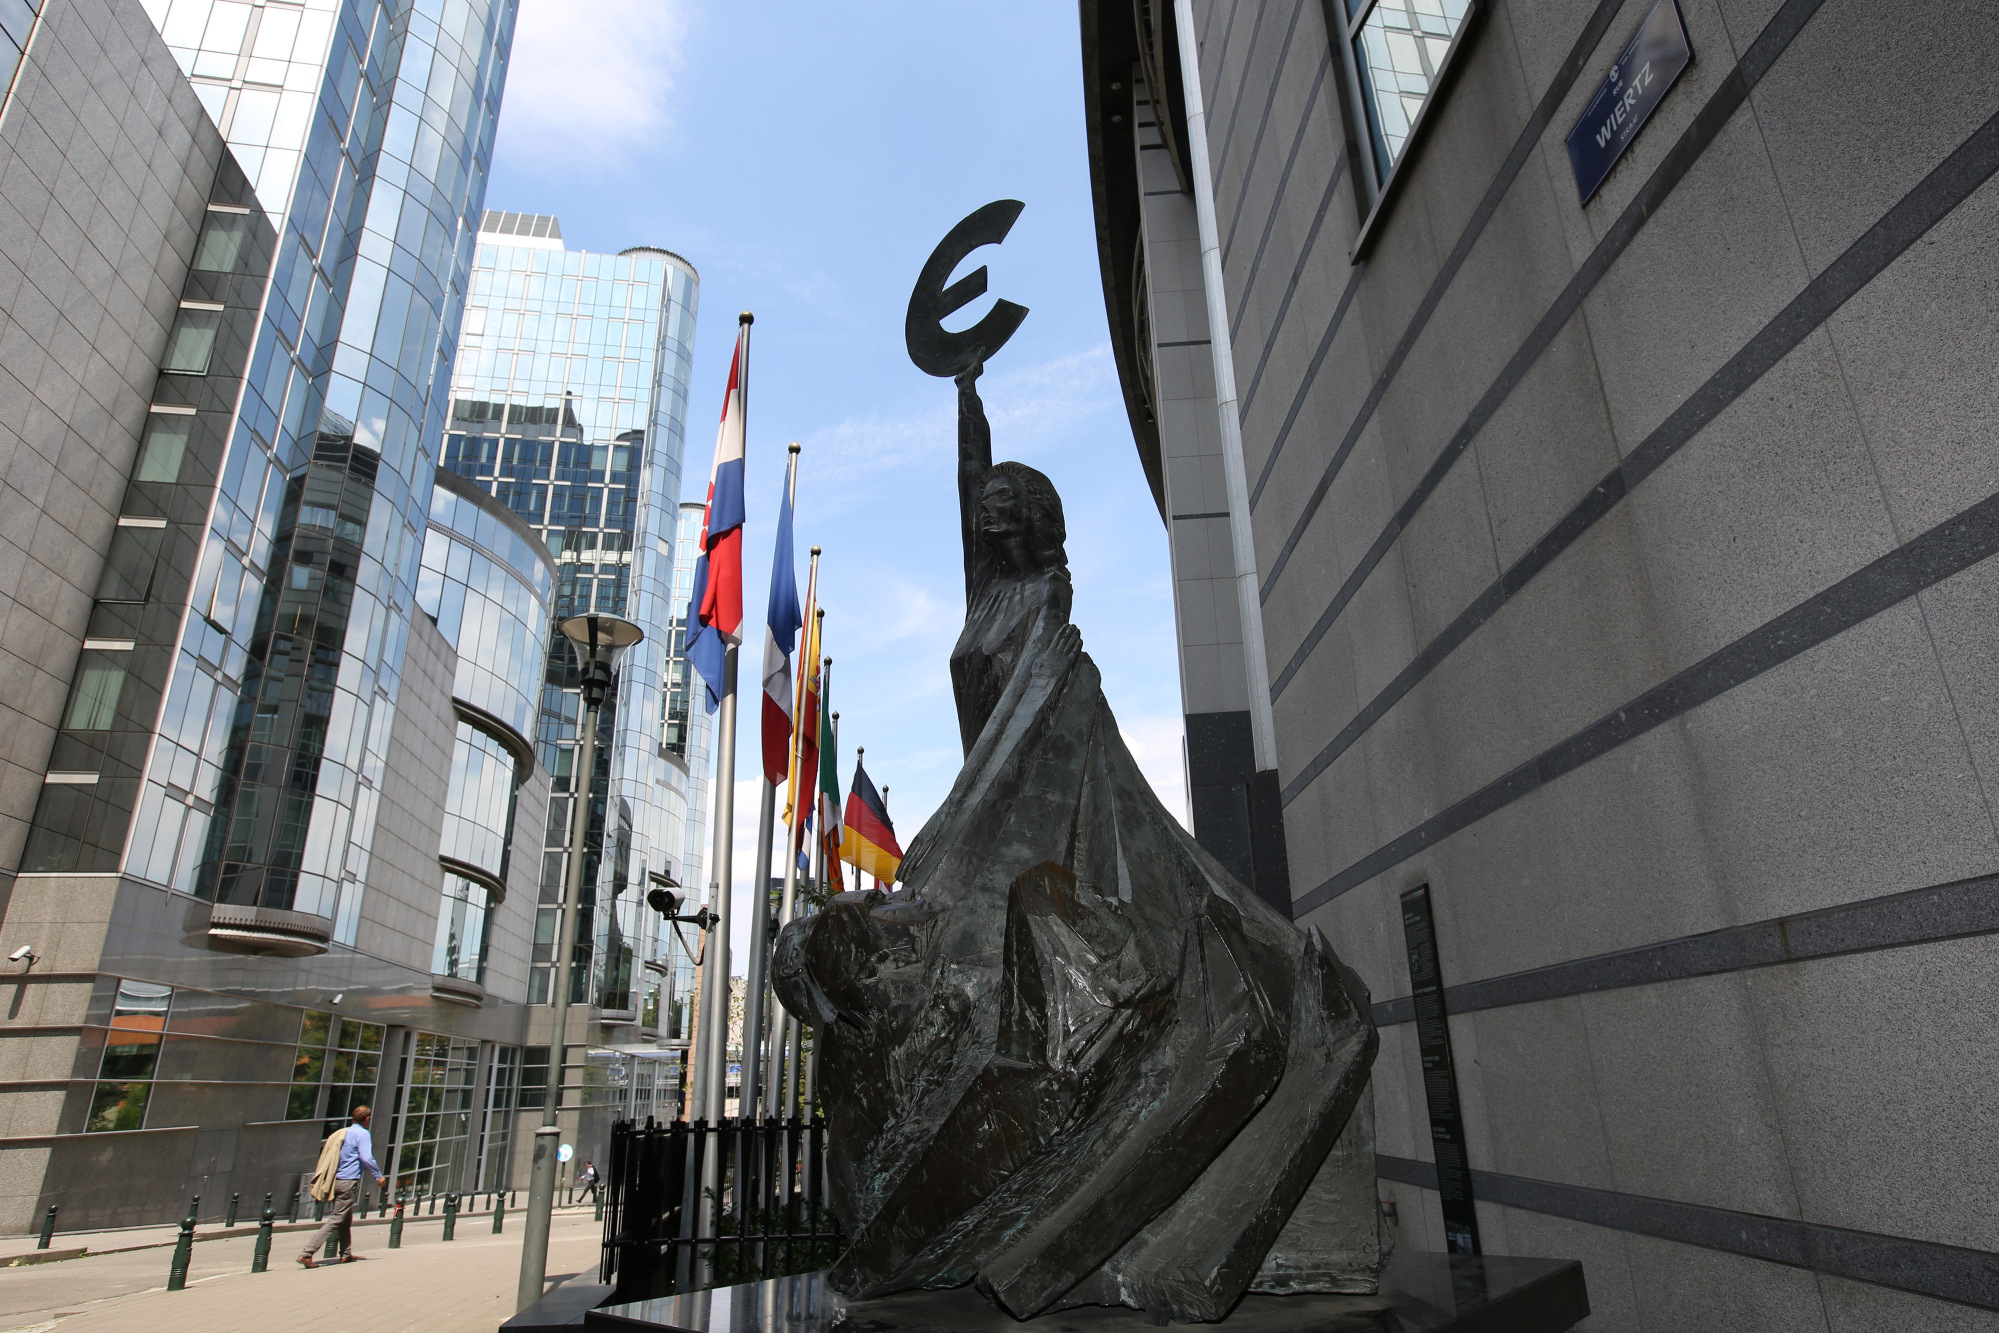 The bronze statue 'Europe' is pictured outside the European Union (EU) parliament building in Brussels, Belgium, on Monday, July 17, 2018. Photographer: Yuriko Nakao/ Bloomberg